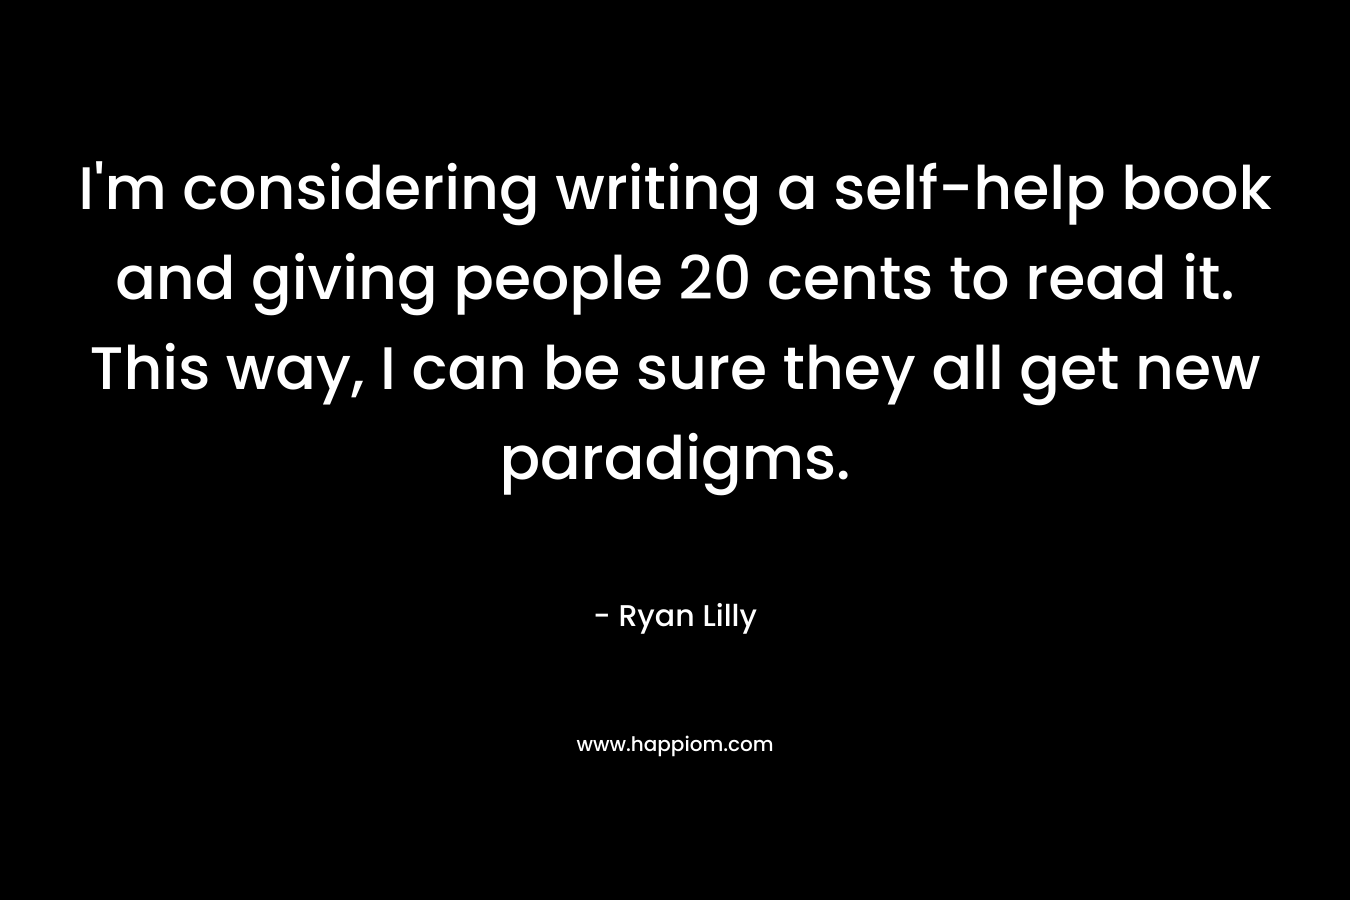 I'm considering writing a self-help book and giving people 20 cents to read it. This way, I can be sure they all get new paradigms.